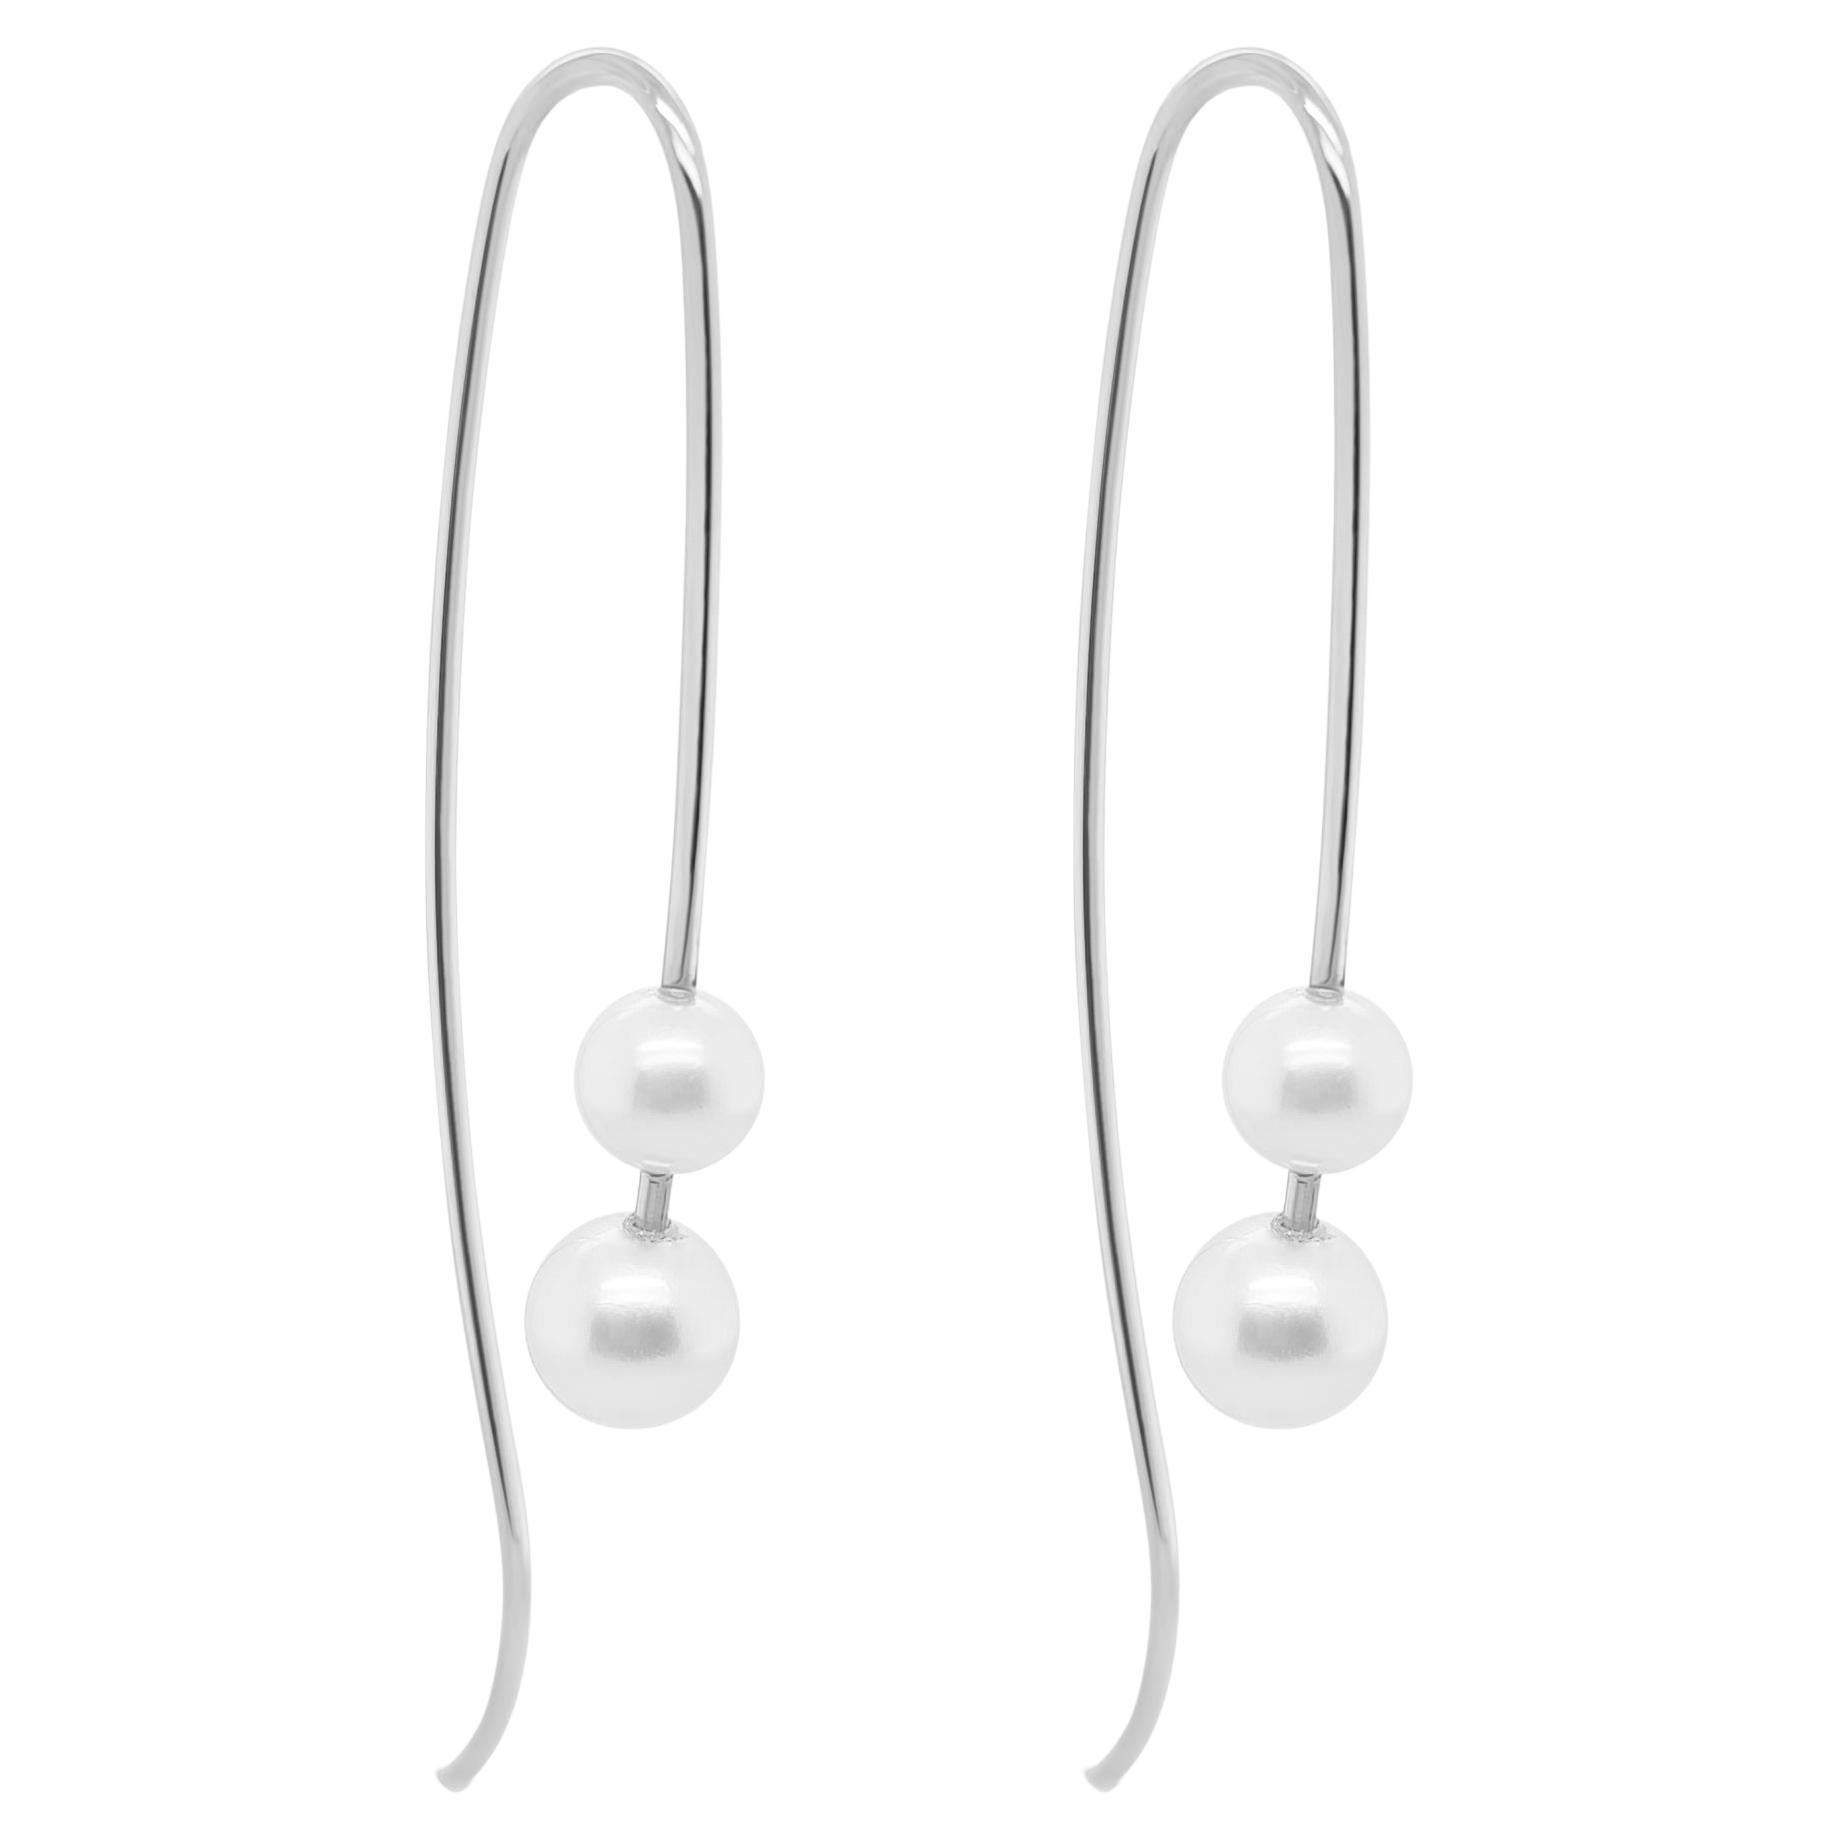 18ct White Gold and Pearl Earrings "Amelia"